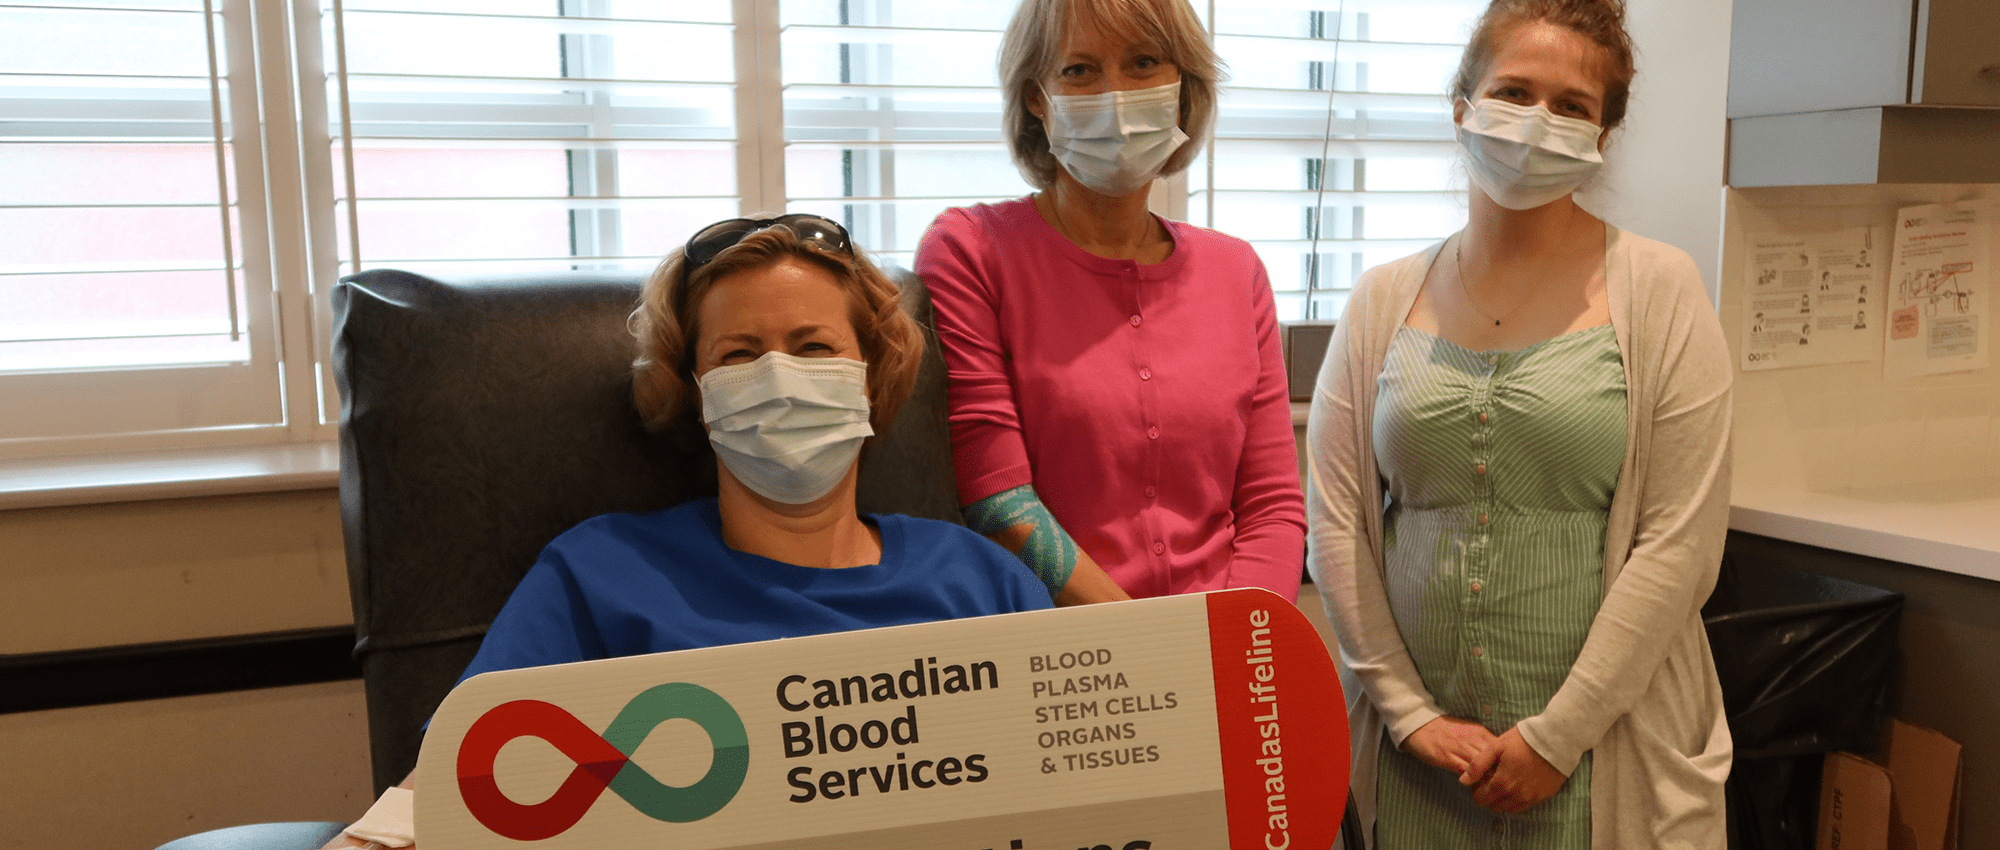 RBC Blood donor in donor chair with Canadian Blood Services staff   